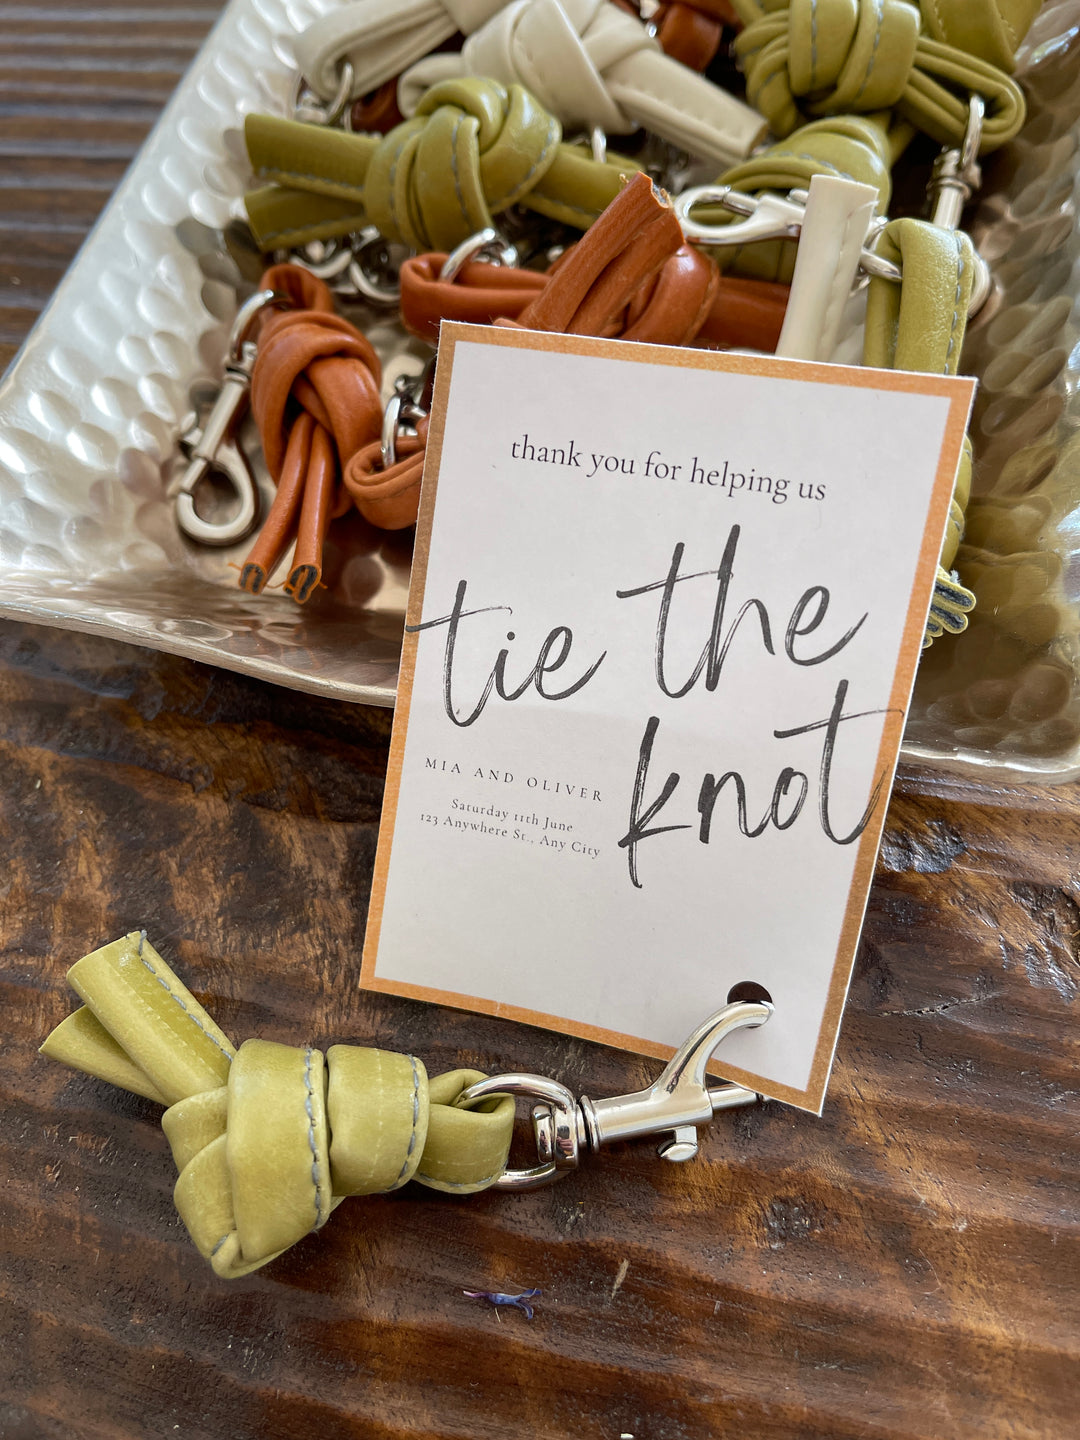 "Tie the Knot" - French Knot Bag Charm